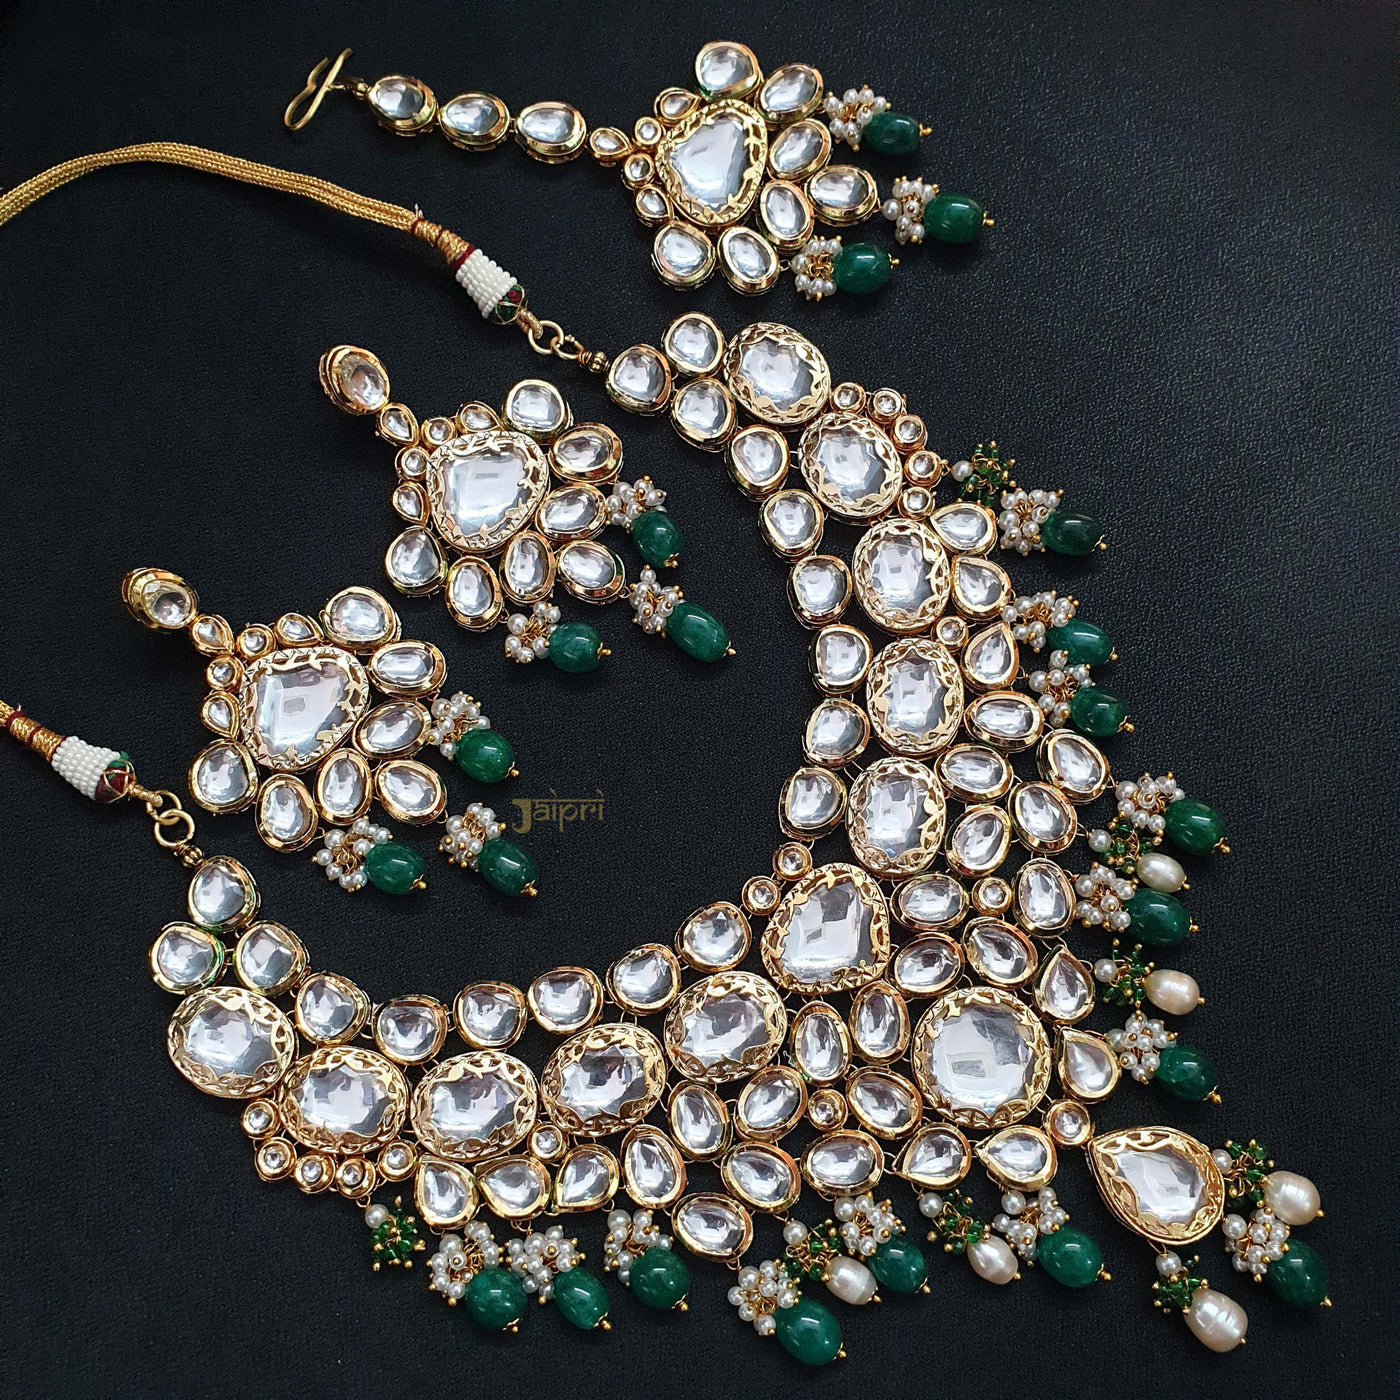 Kundan Pearl And Green Beads Bridal Necklace With Earrings And Maangtikka